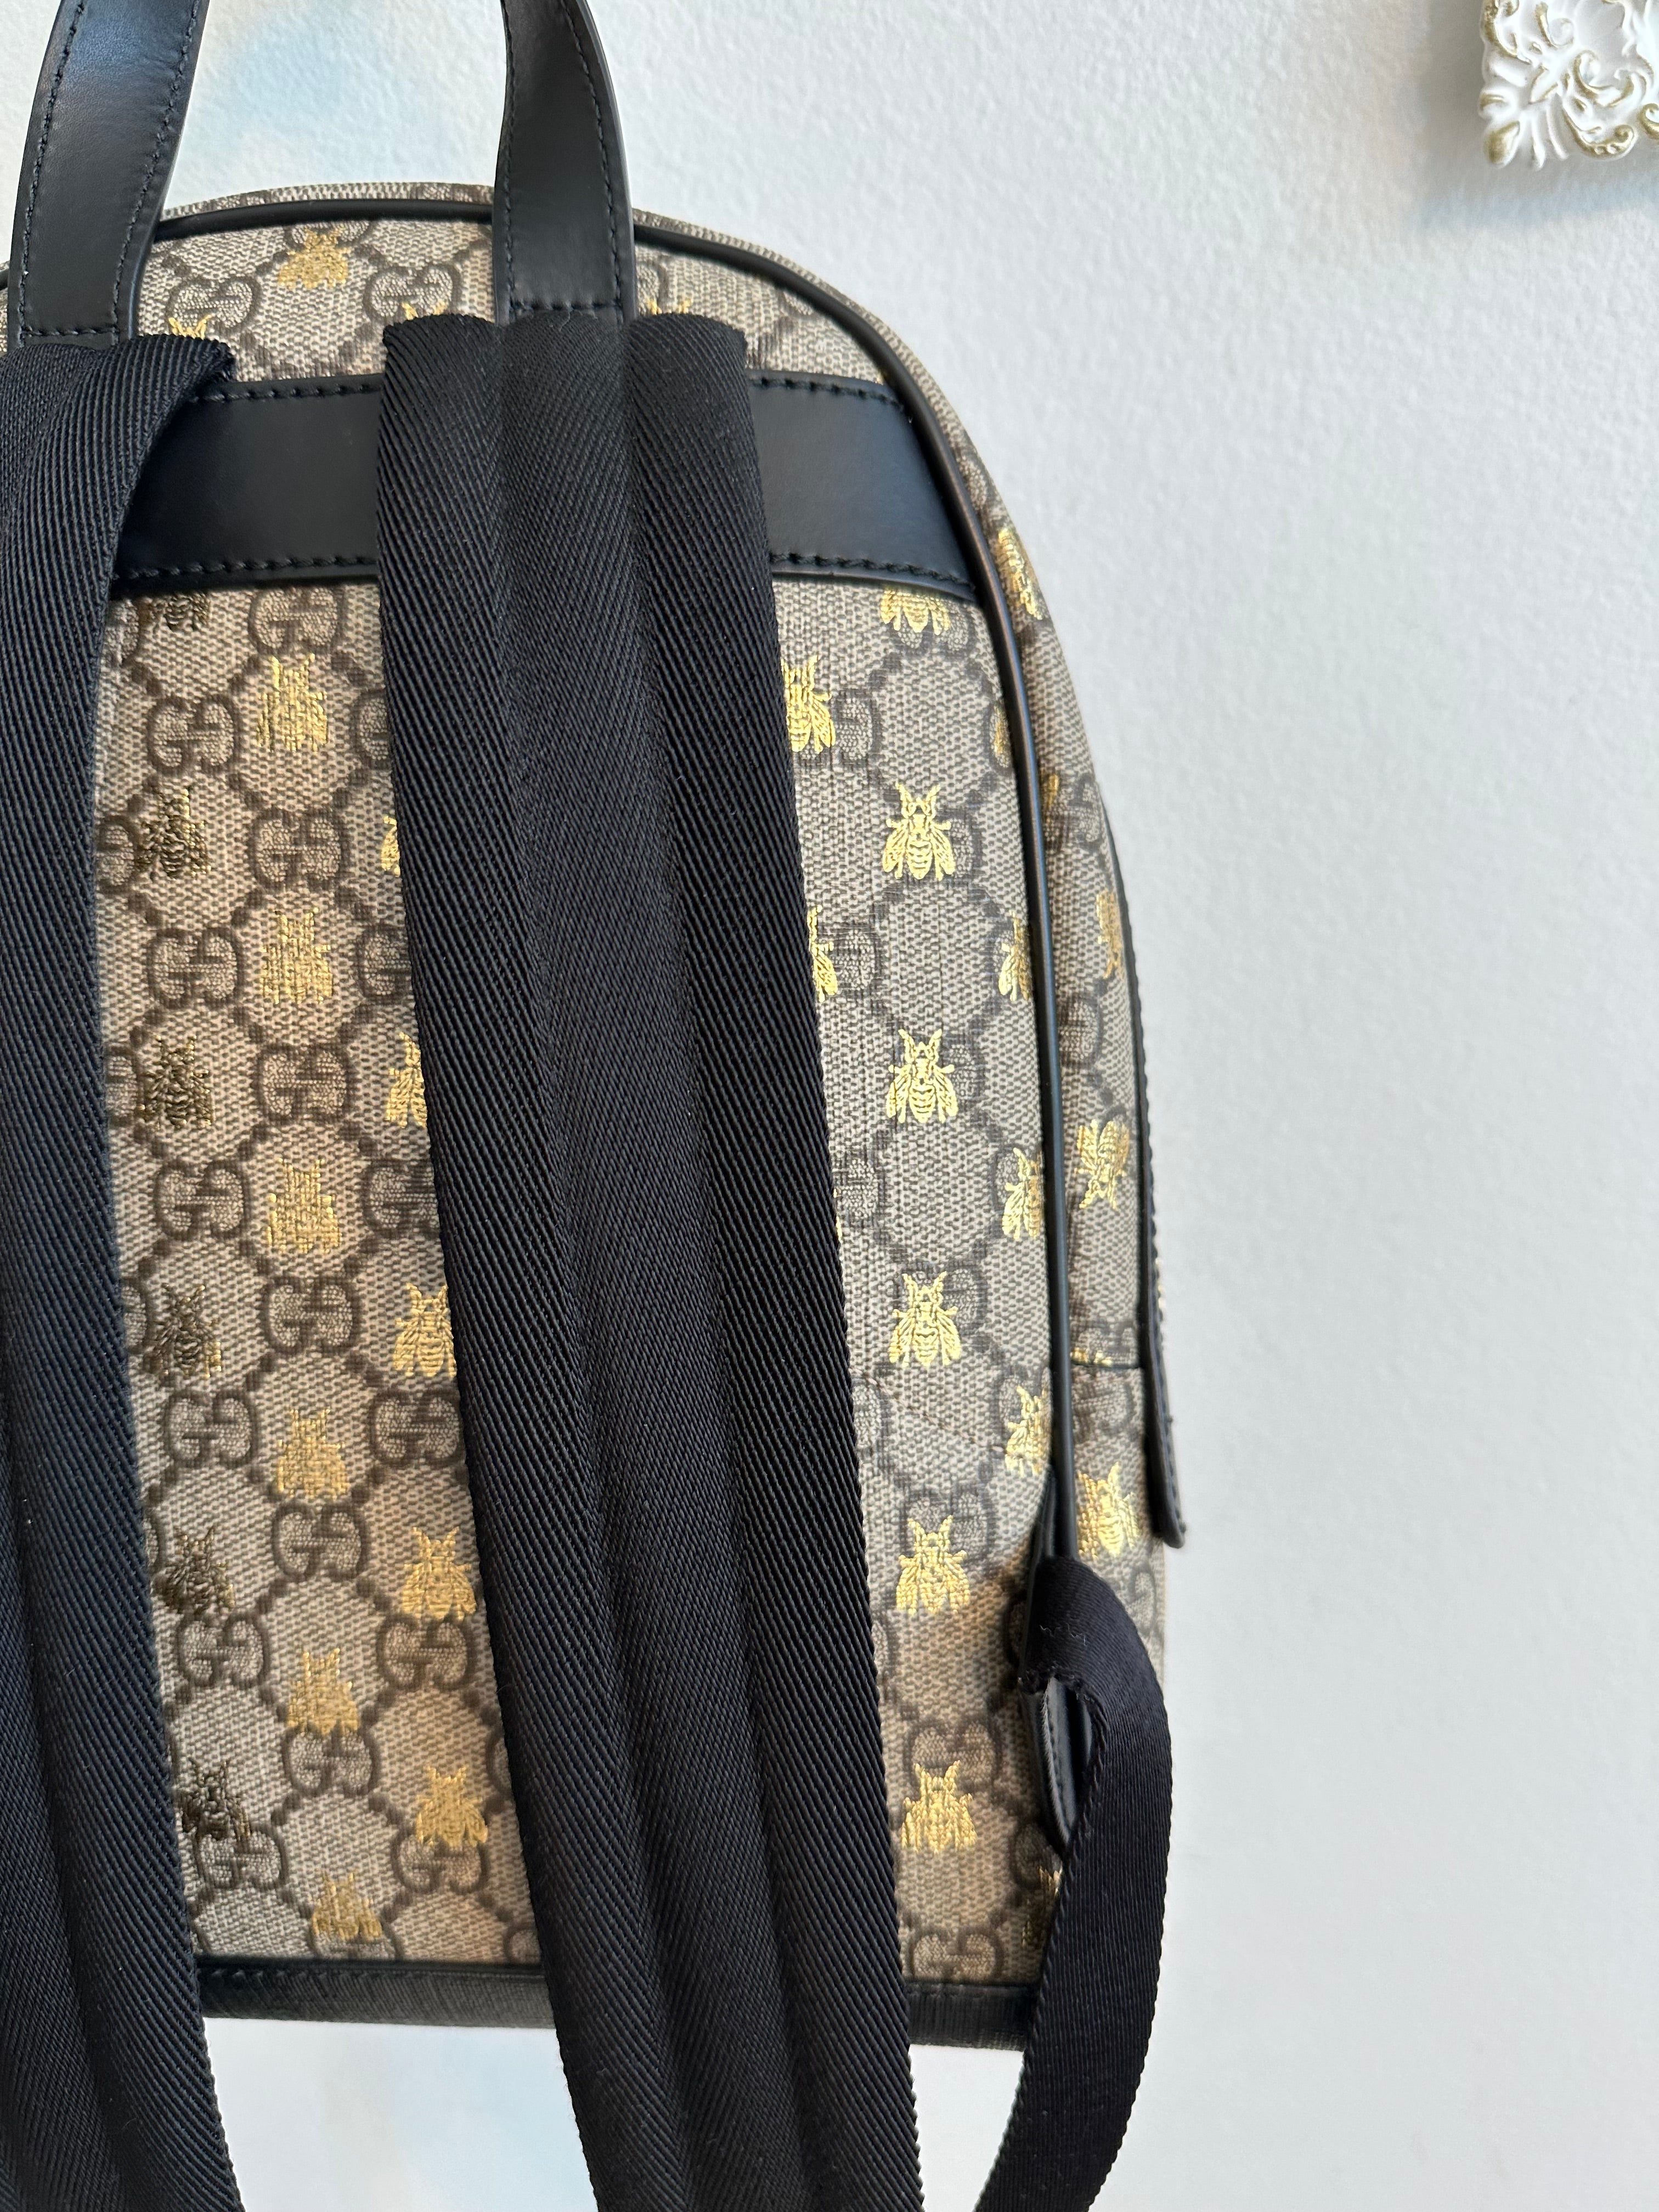 Pre-Owned GUCCI GG Supreme Bees Backpack